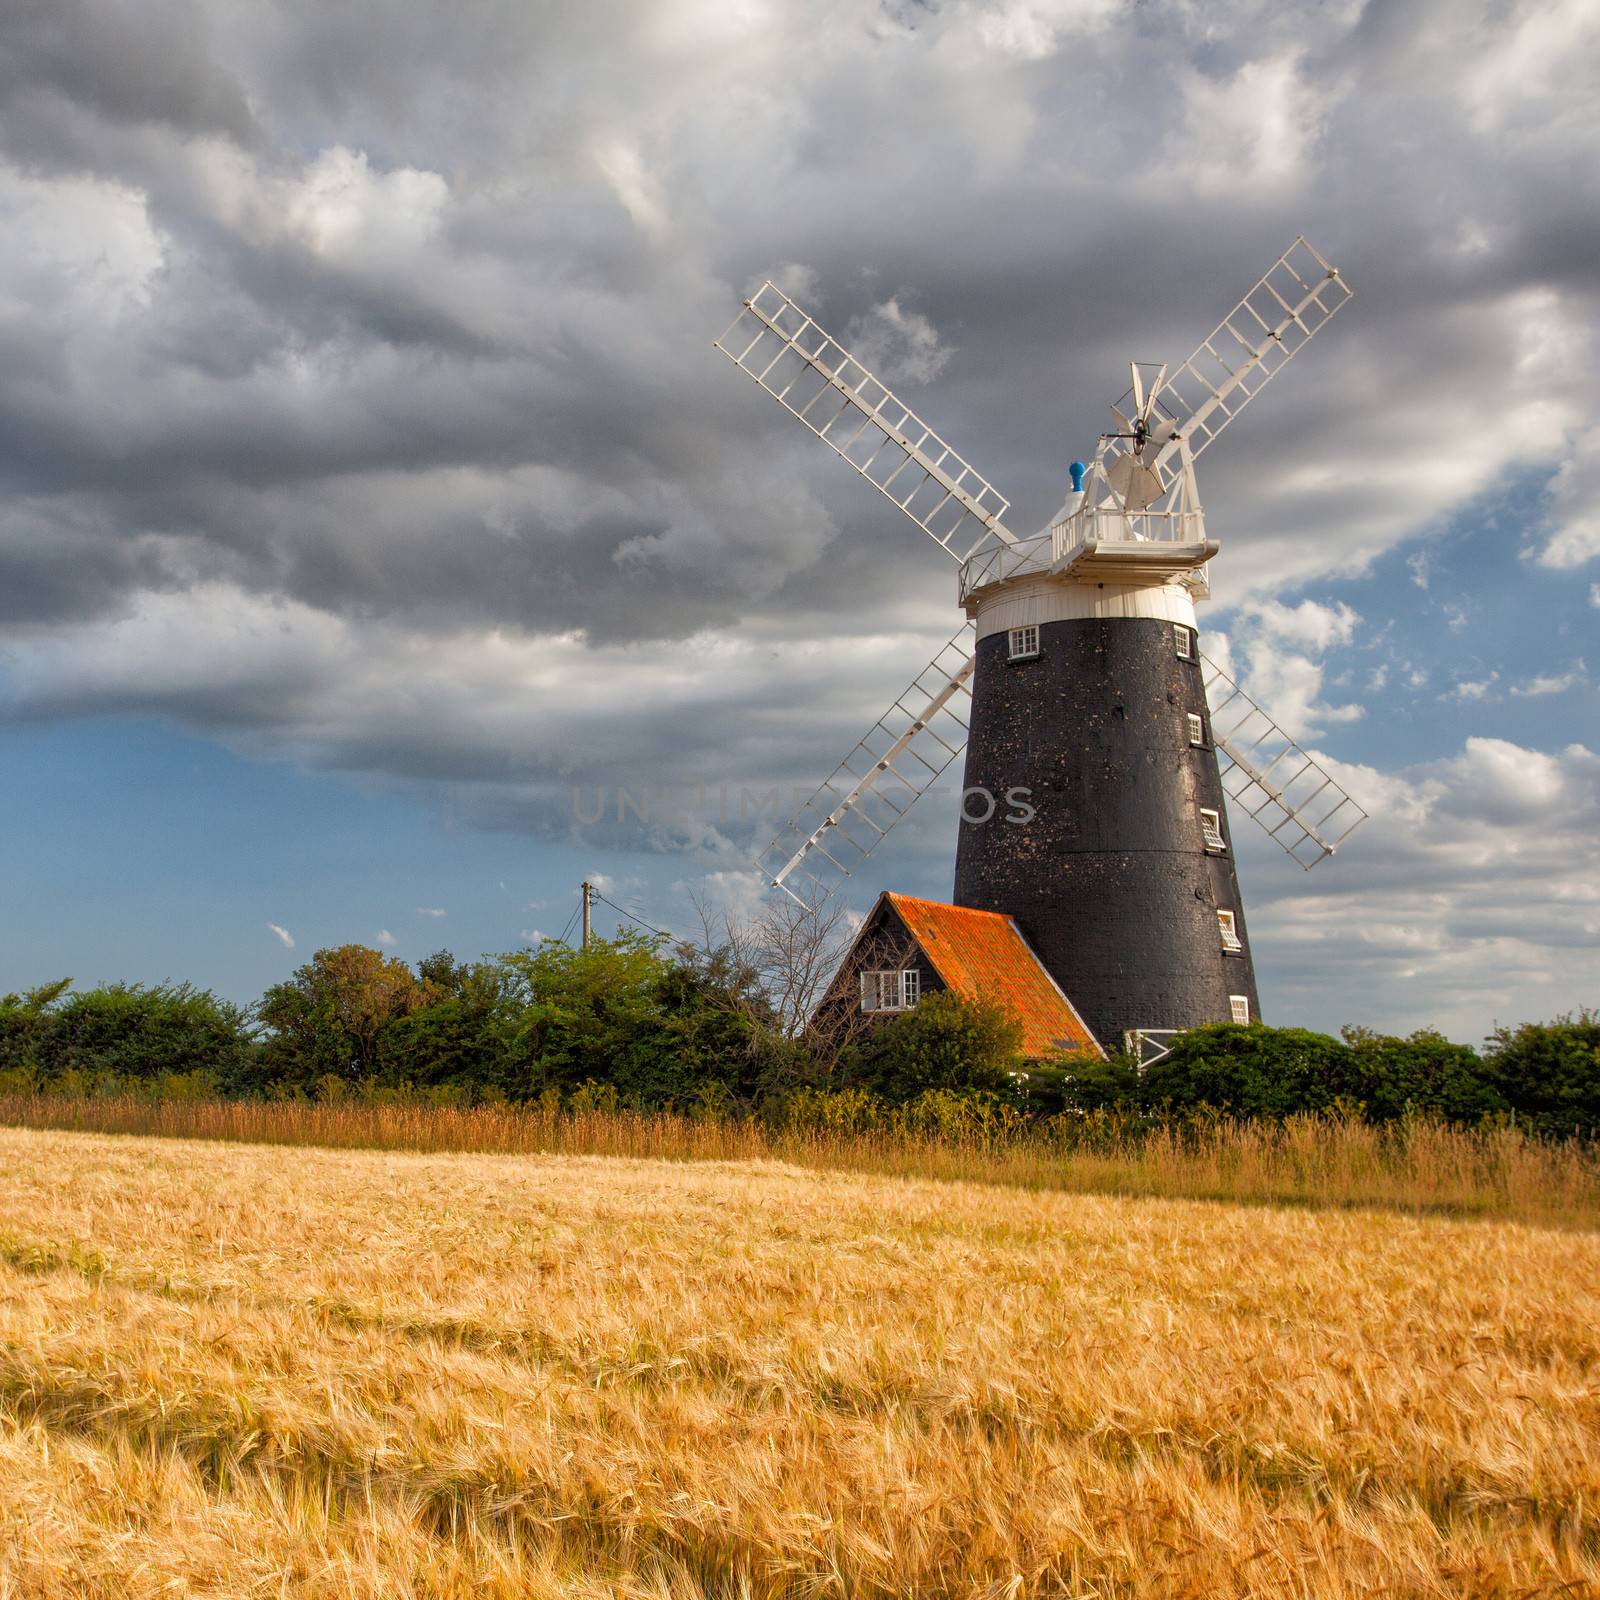 Windmill on the edge of a barley field